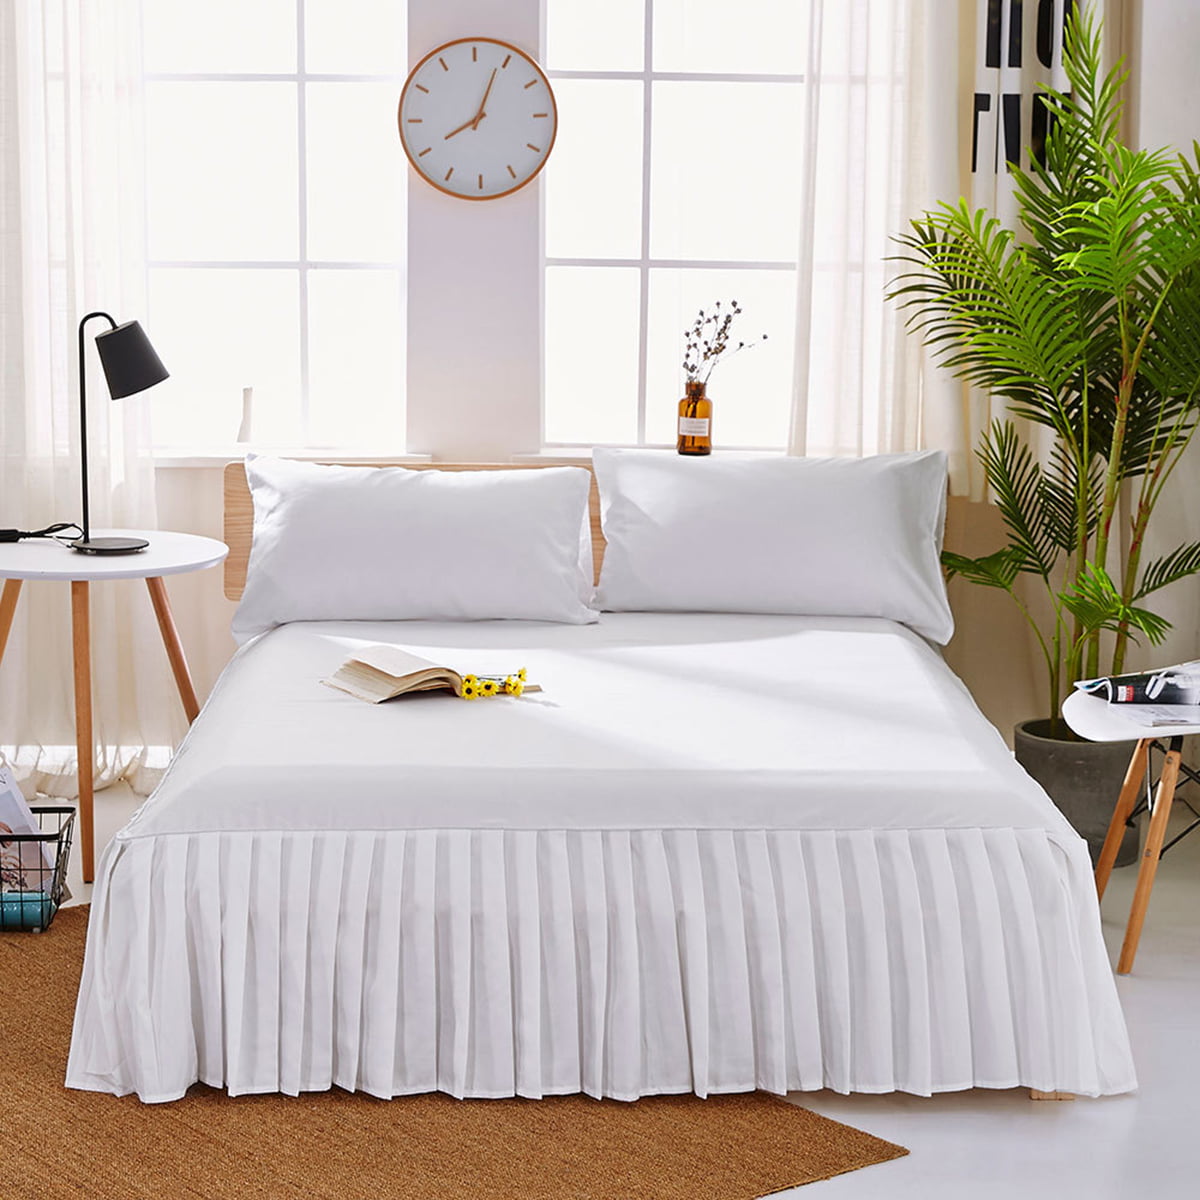 Pleated Styling Lux Hotel Bedding Tailored Bedskirt Queen Classic 14 Drop Length Turq